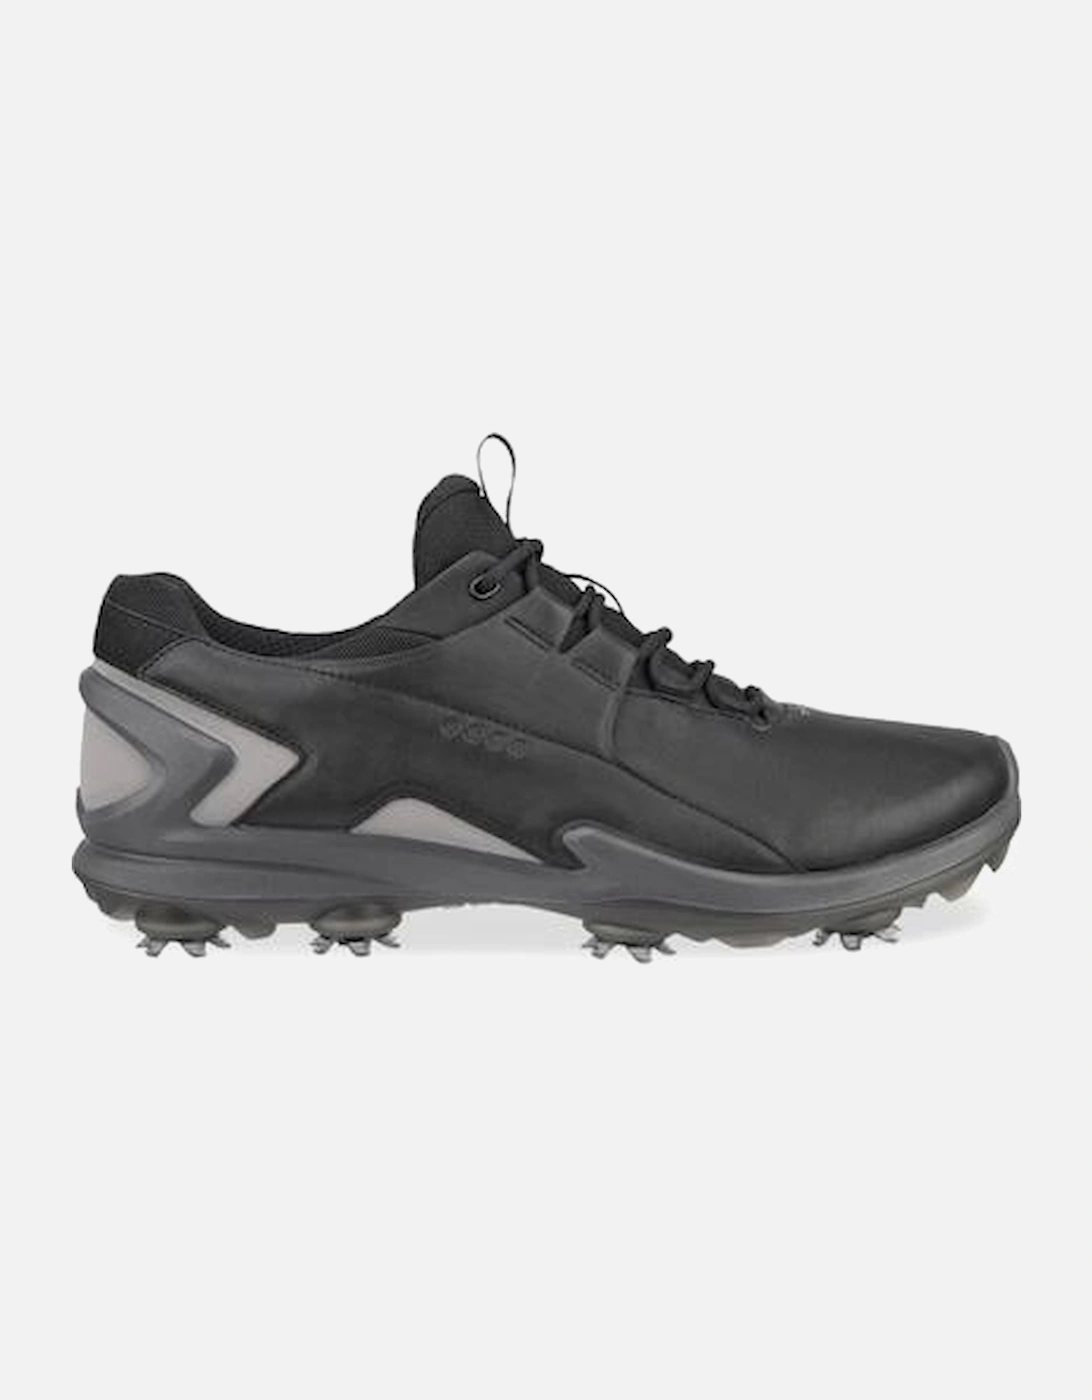 Biom Tour Mens golf shoe 131904-01001 in Black Leather